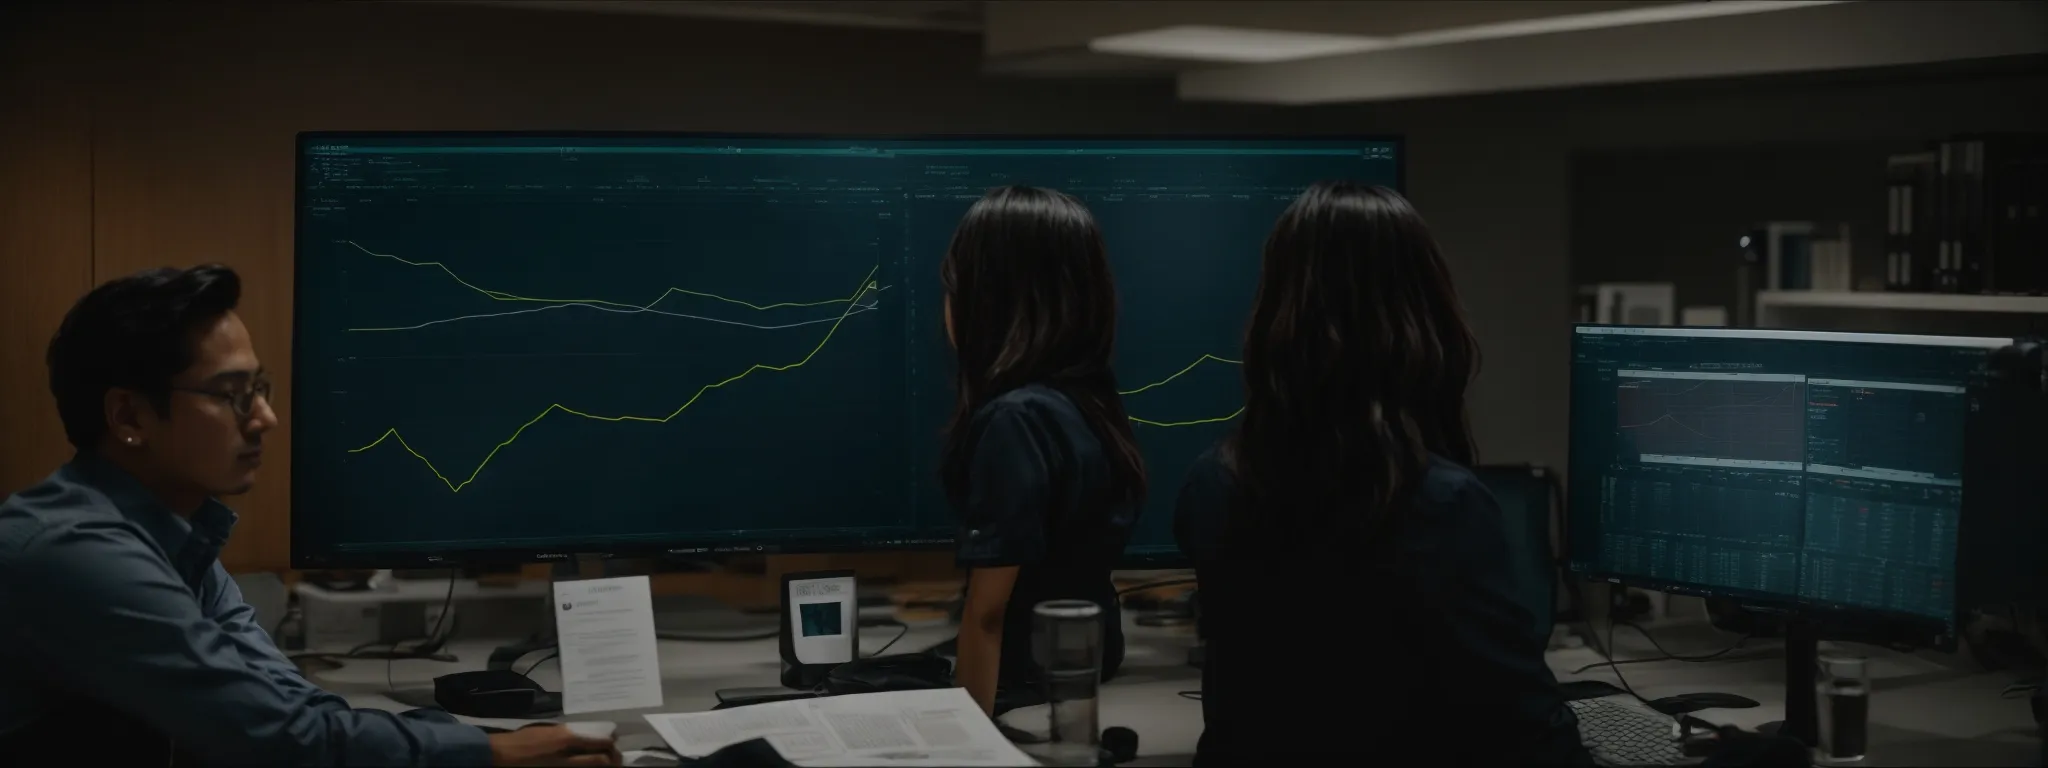 two people in an office examine large graphs on a monitor, discussing seo progress.